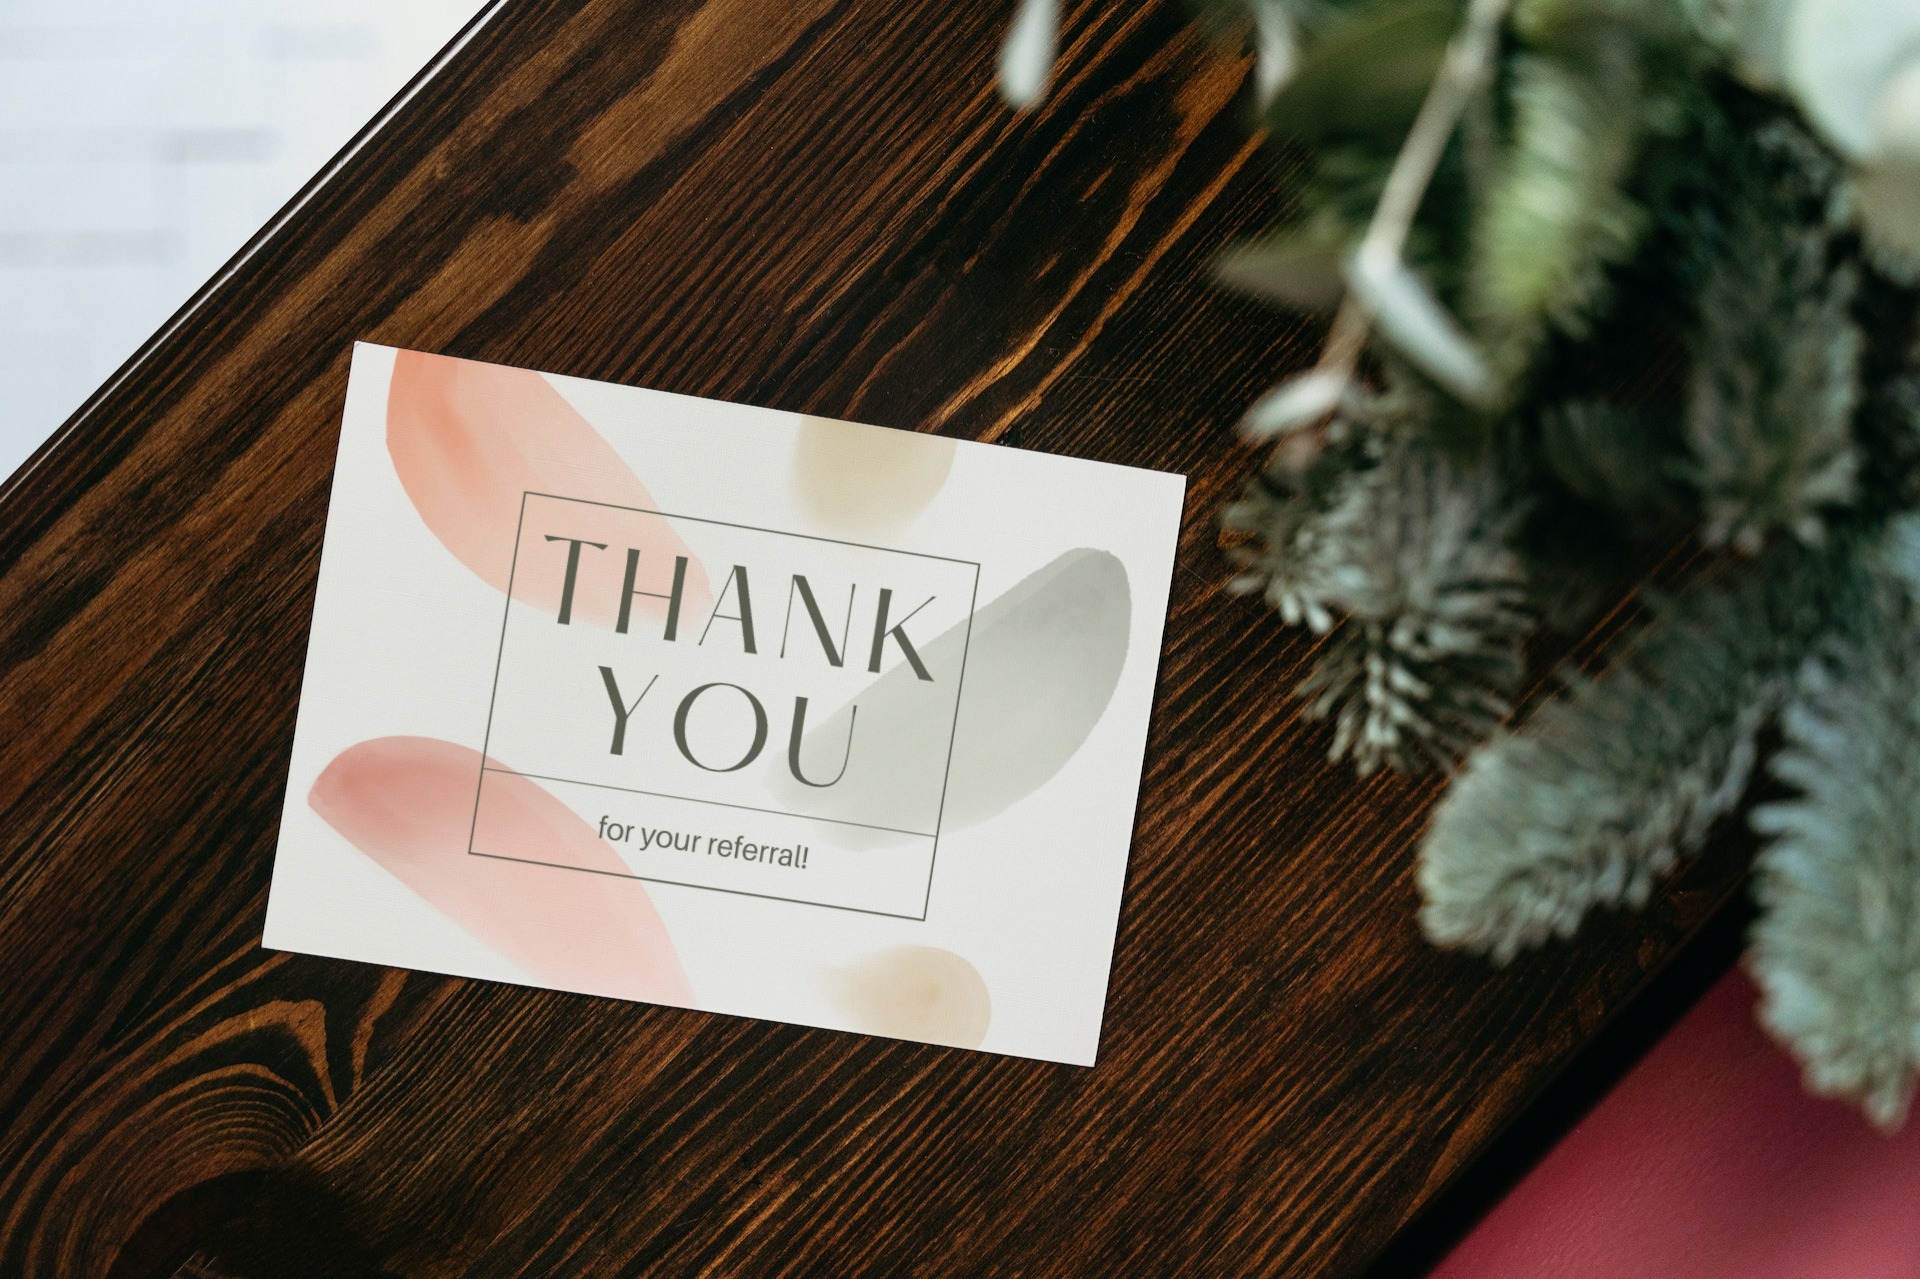 Realtor Referral Thank You Card - Design 5 (with greeting)